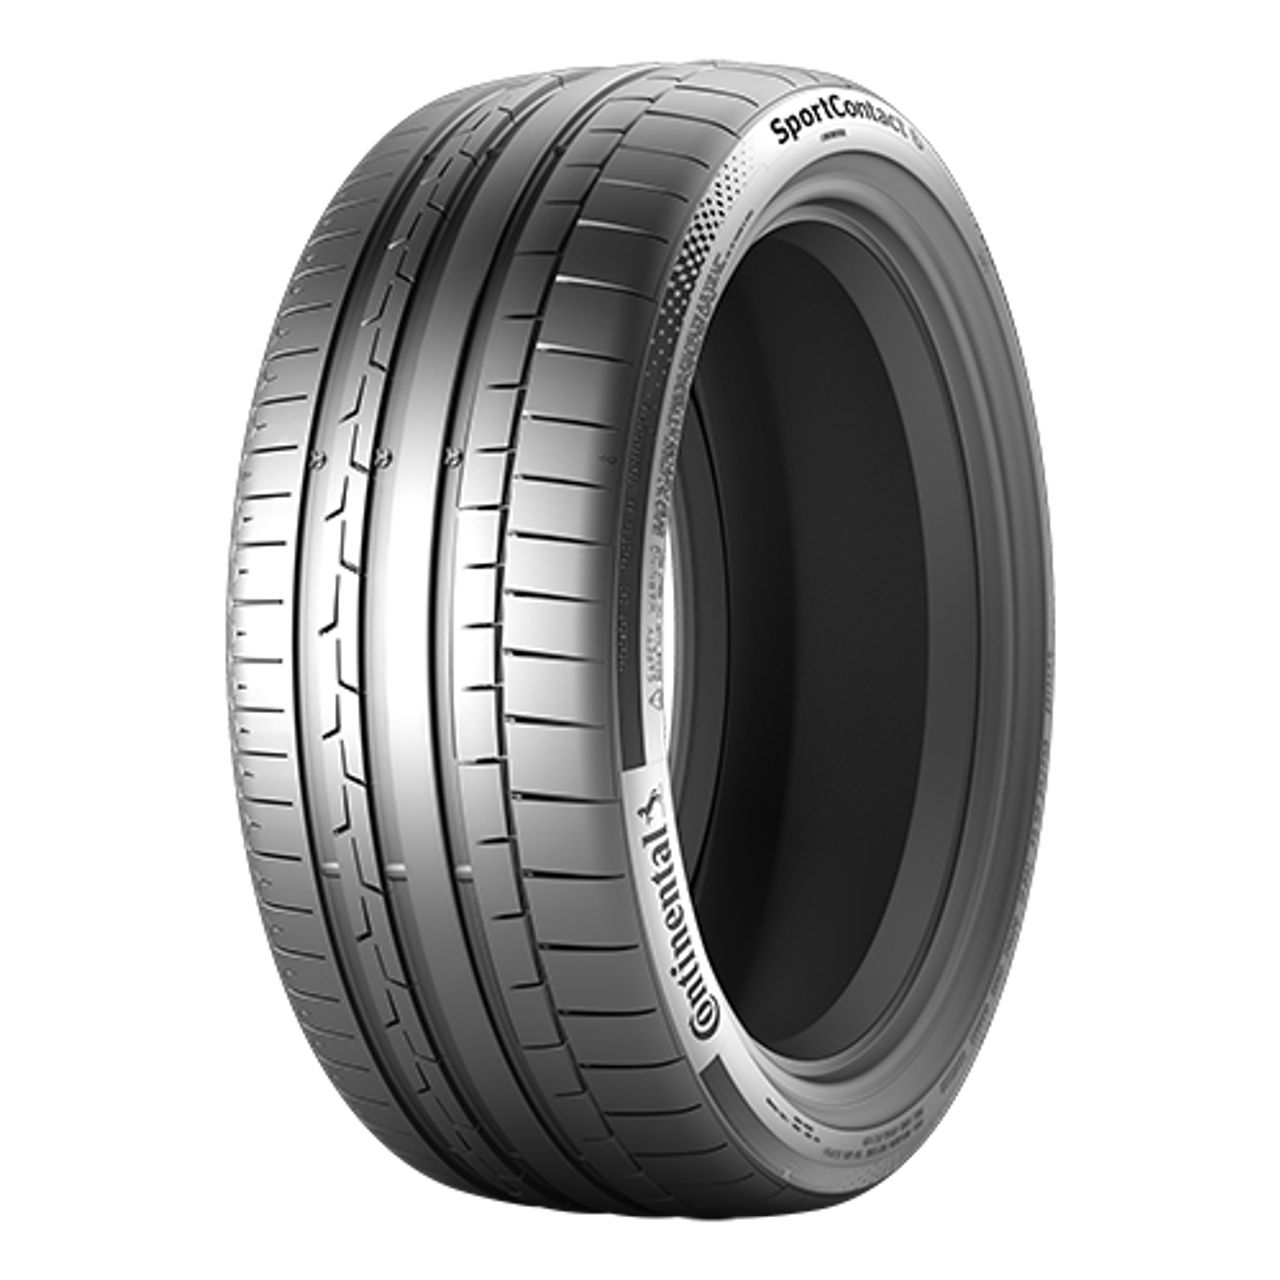 CONTINENTAL SPORTCONTACT 6 (EVc) 245/35ZR20 95(Y) CONTISILENT FR XL